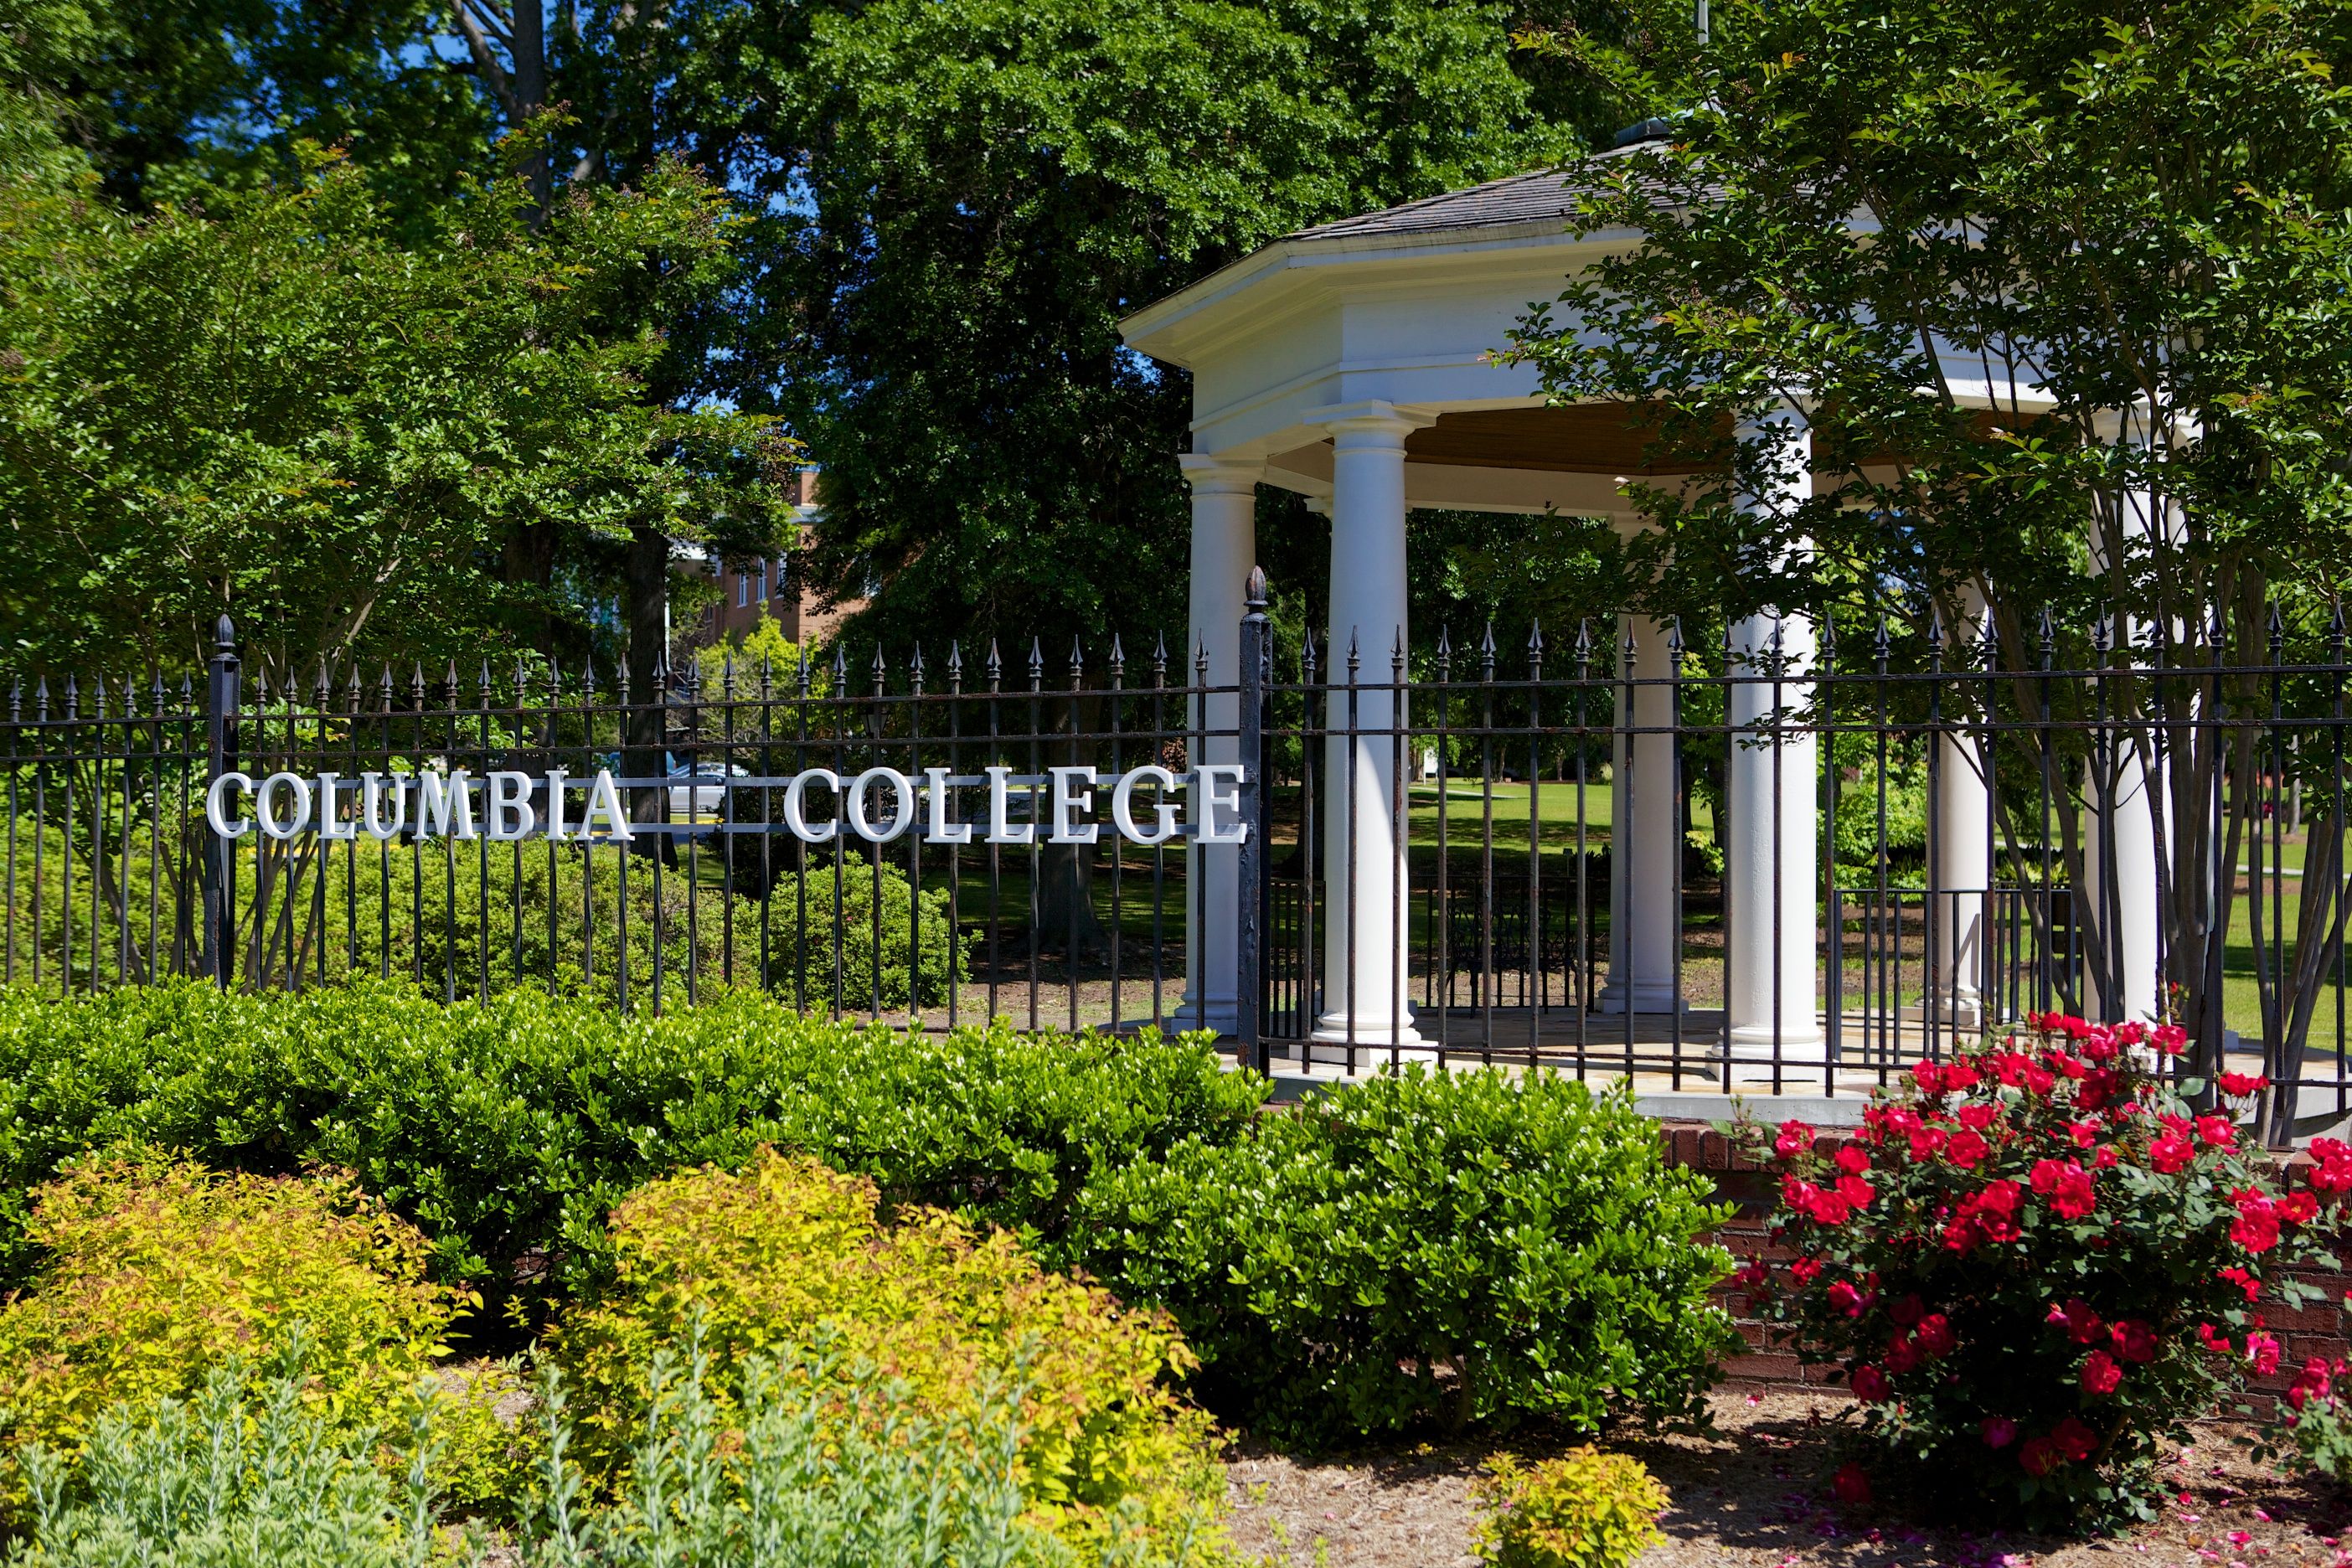 Columbia College Sign from Road